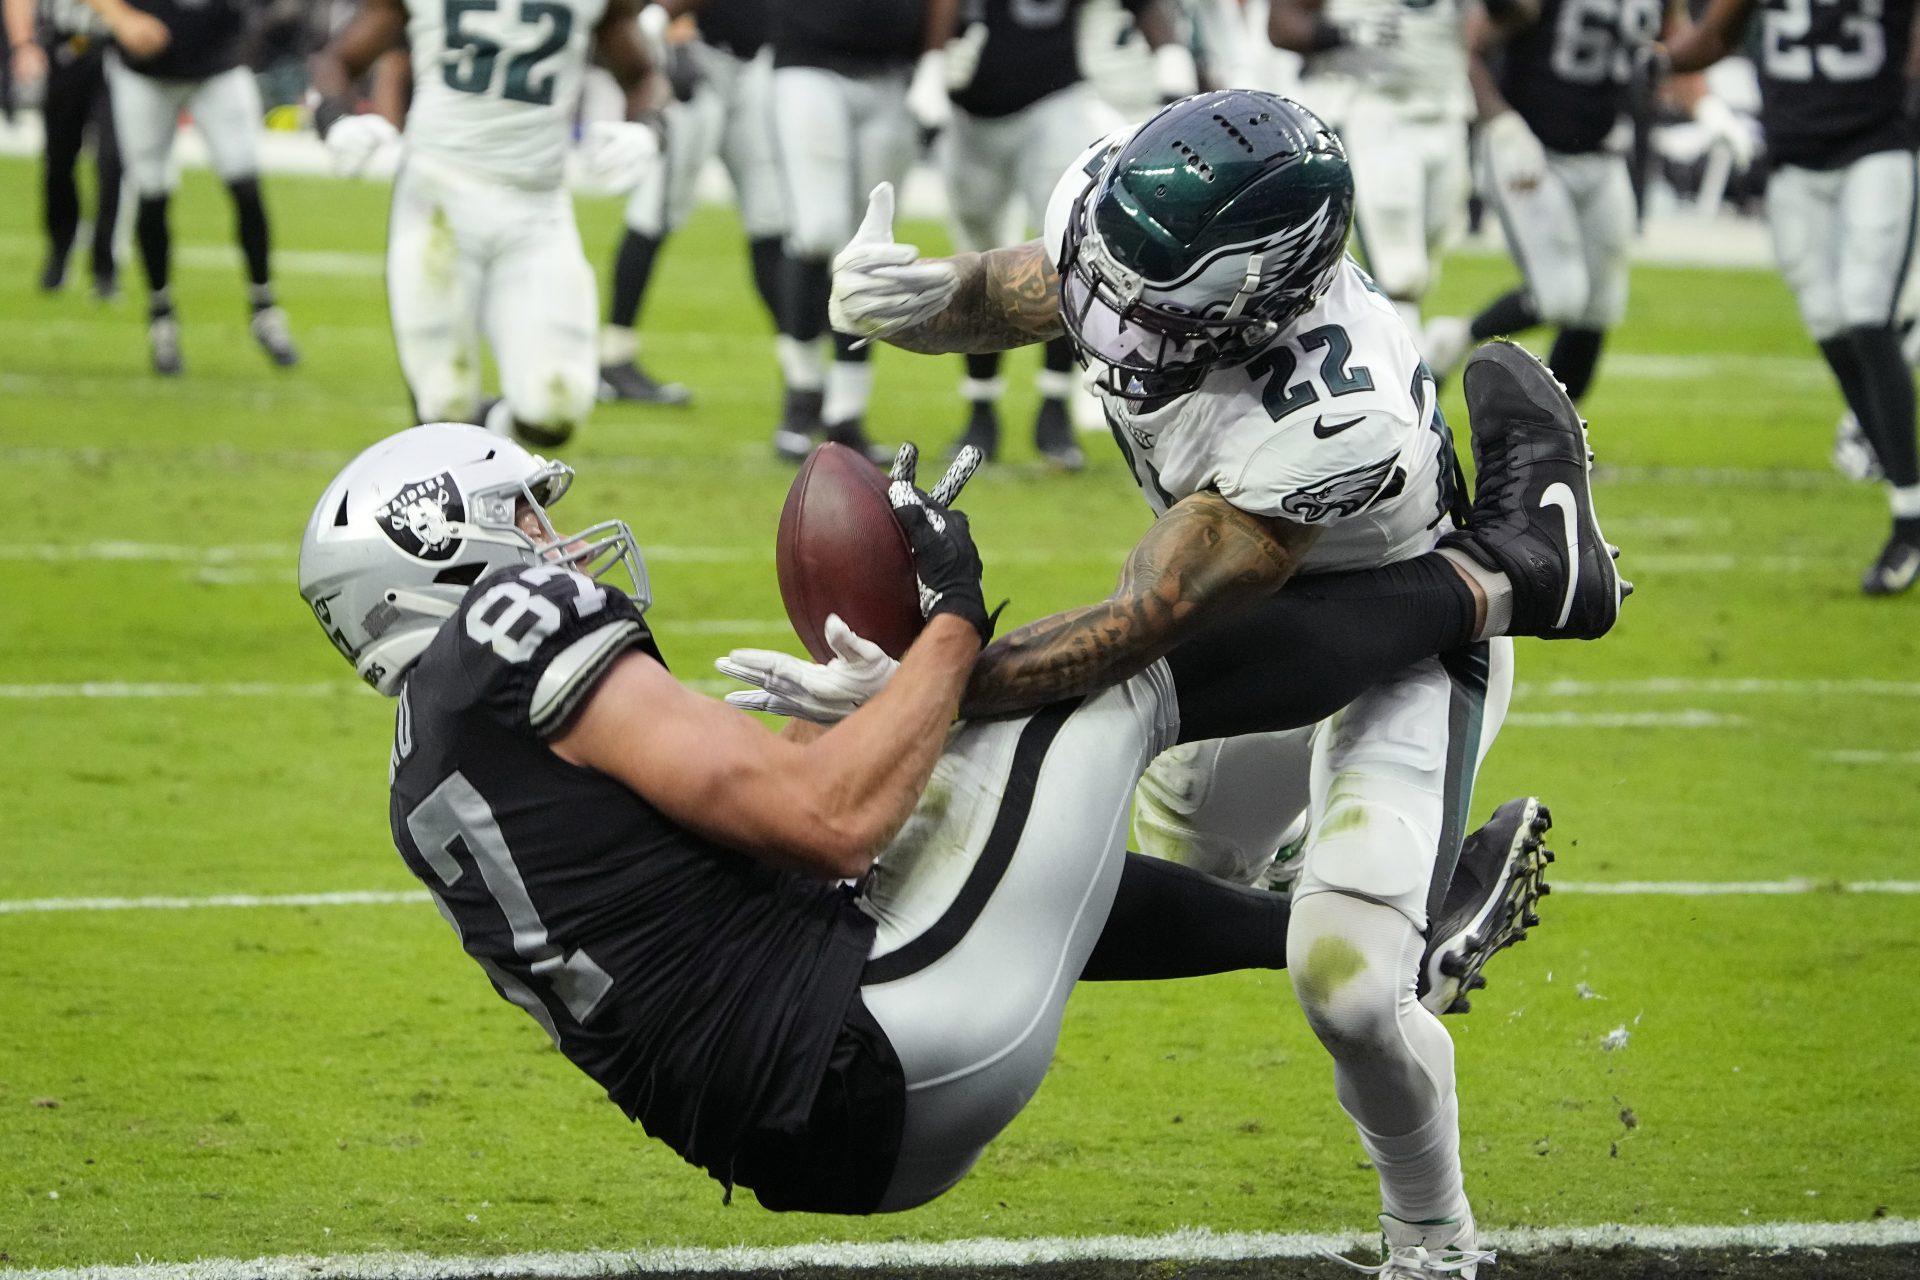 Las Vegas Raiders tight end Foster Moreau (87) catches a pass for a touchdown against Philadelphia Eagles safety Marcus Epps (22) during the first half of an NFL football game, Sunday, Oct. 24, 2021, in Las Vegas.